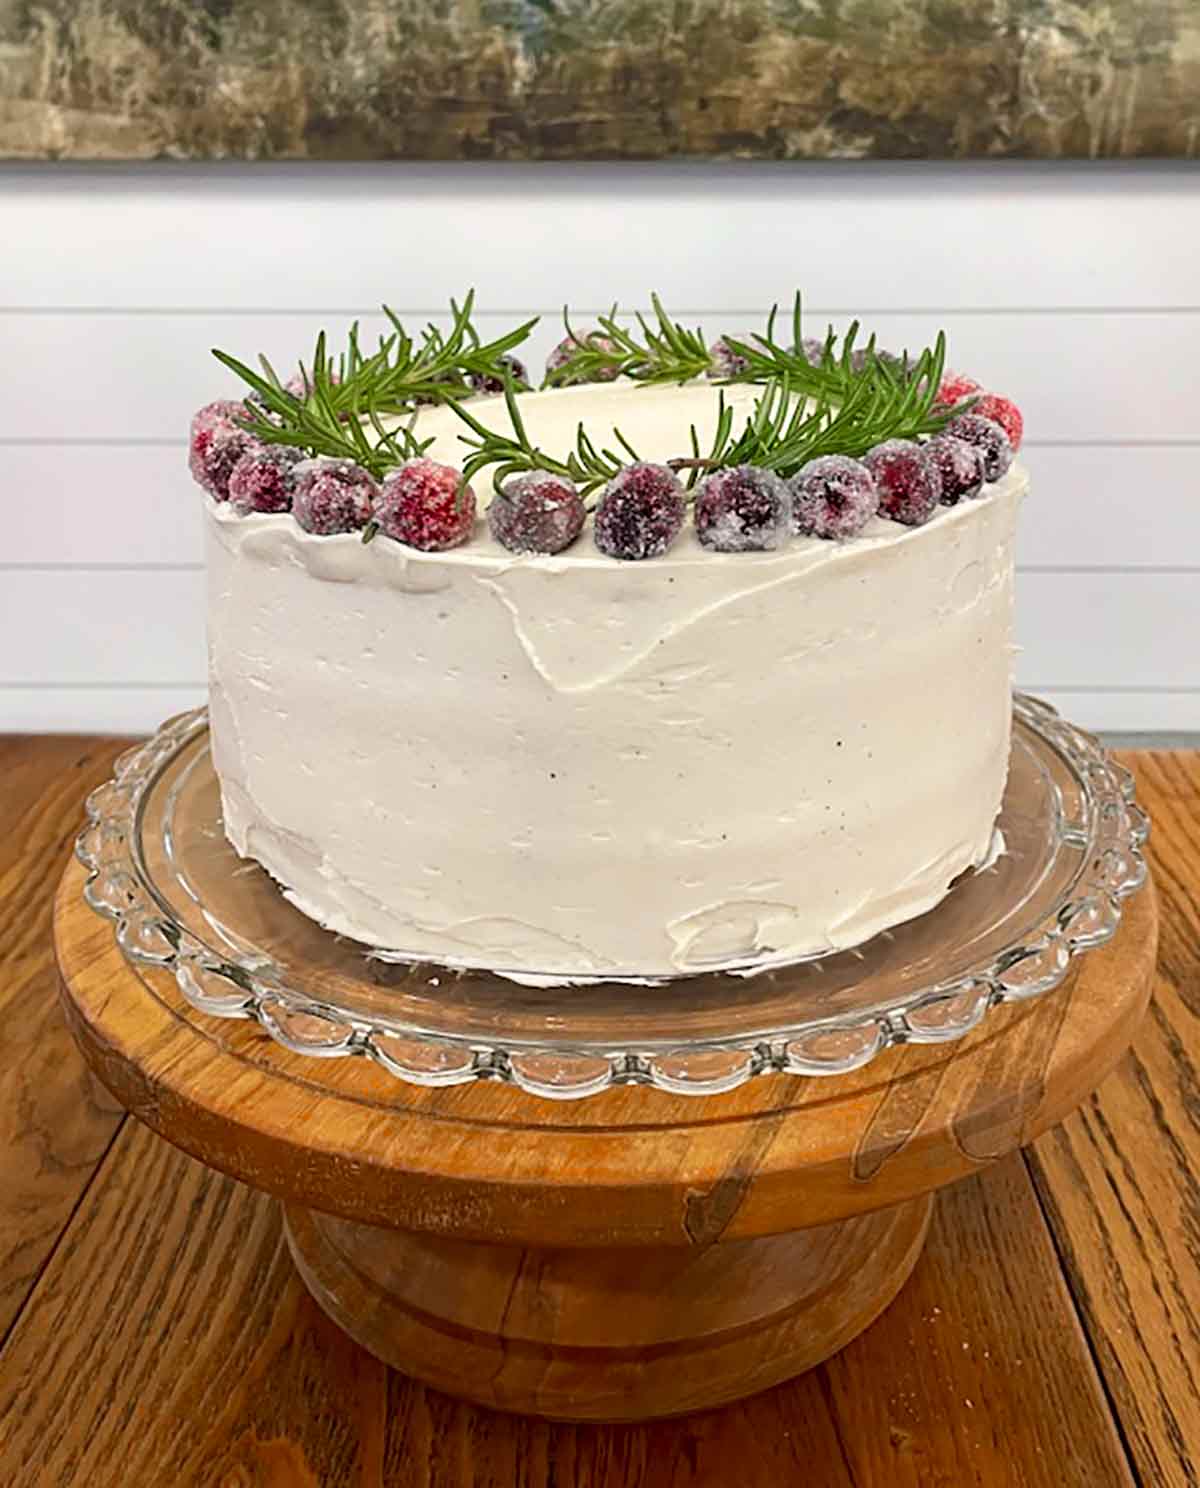 A whole frosted white Christmas cake topped with sugared cranberries and rosemary sprigs on a glass plate on a wooden cake stand.